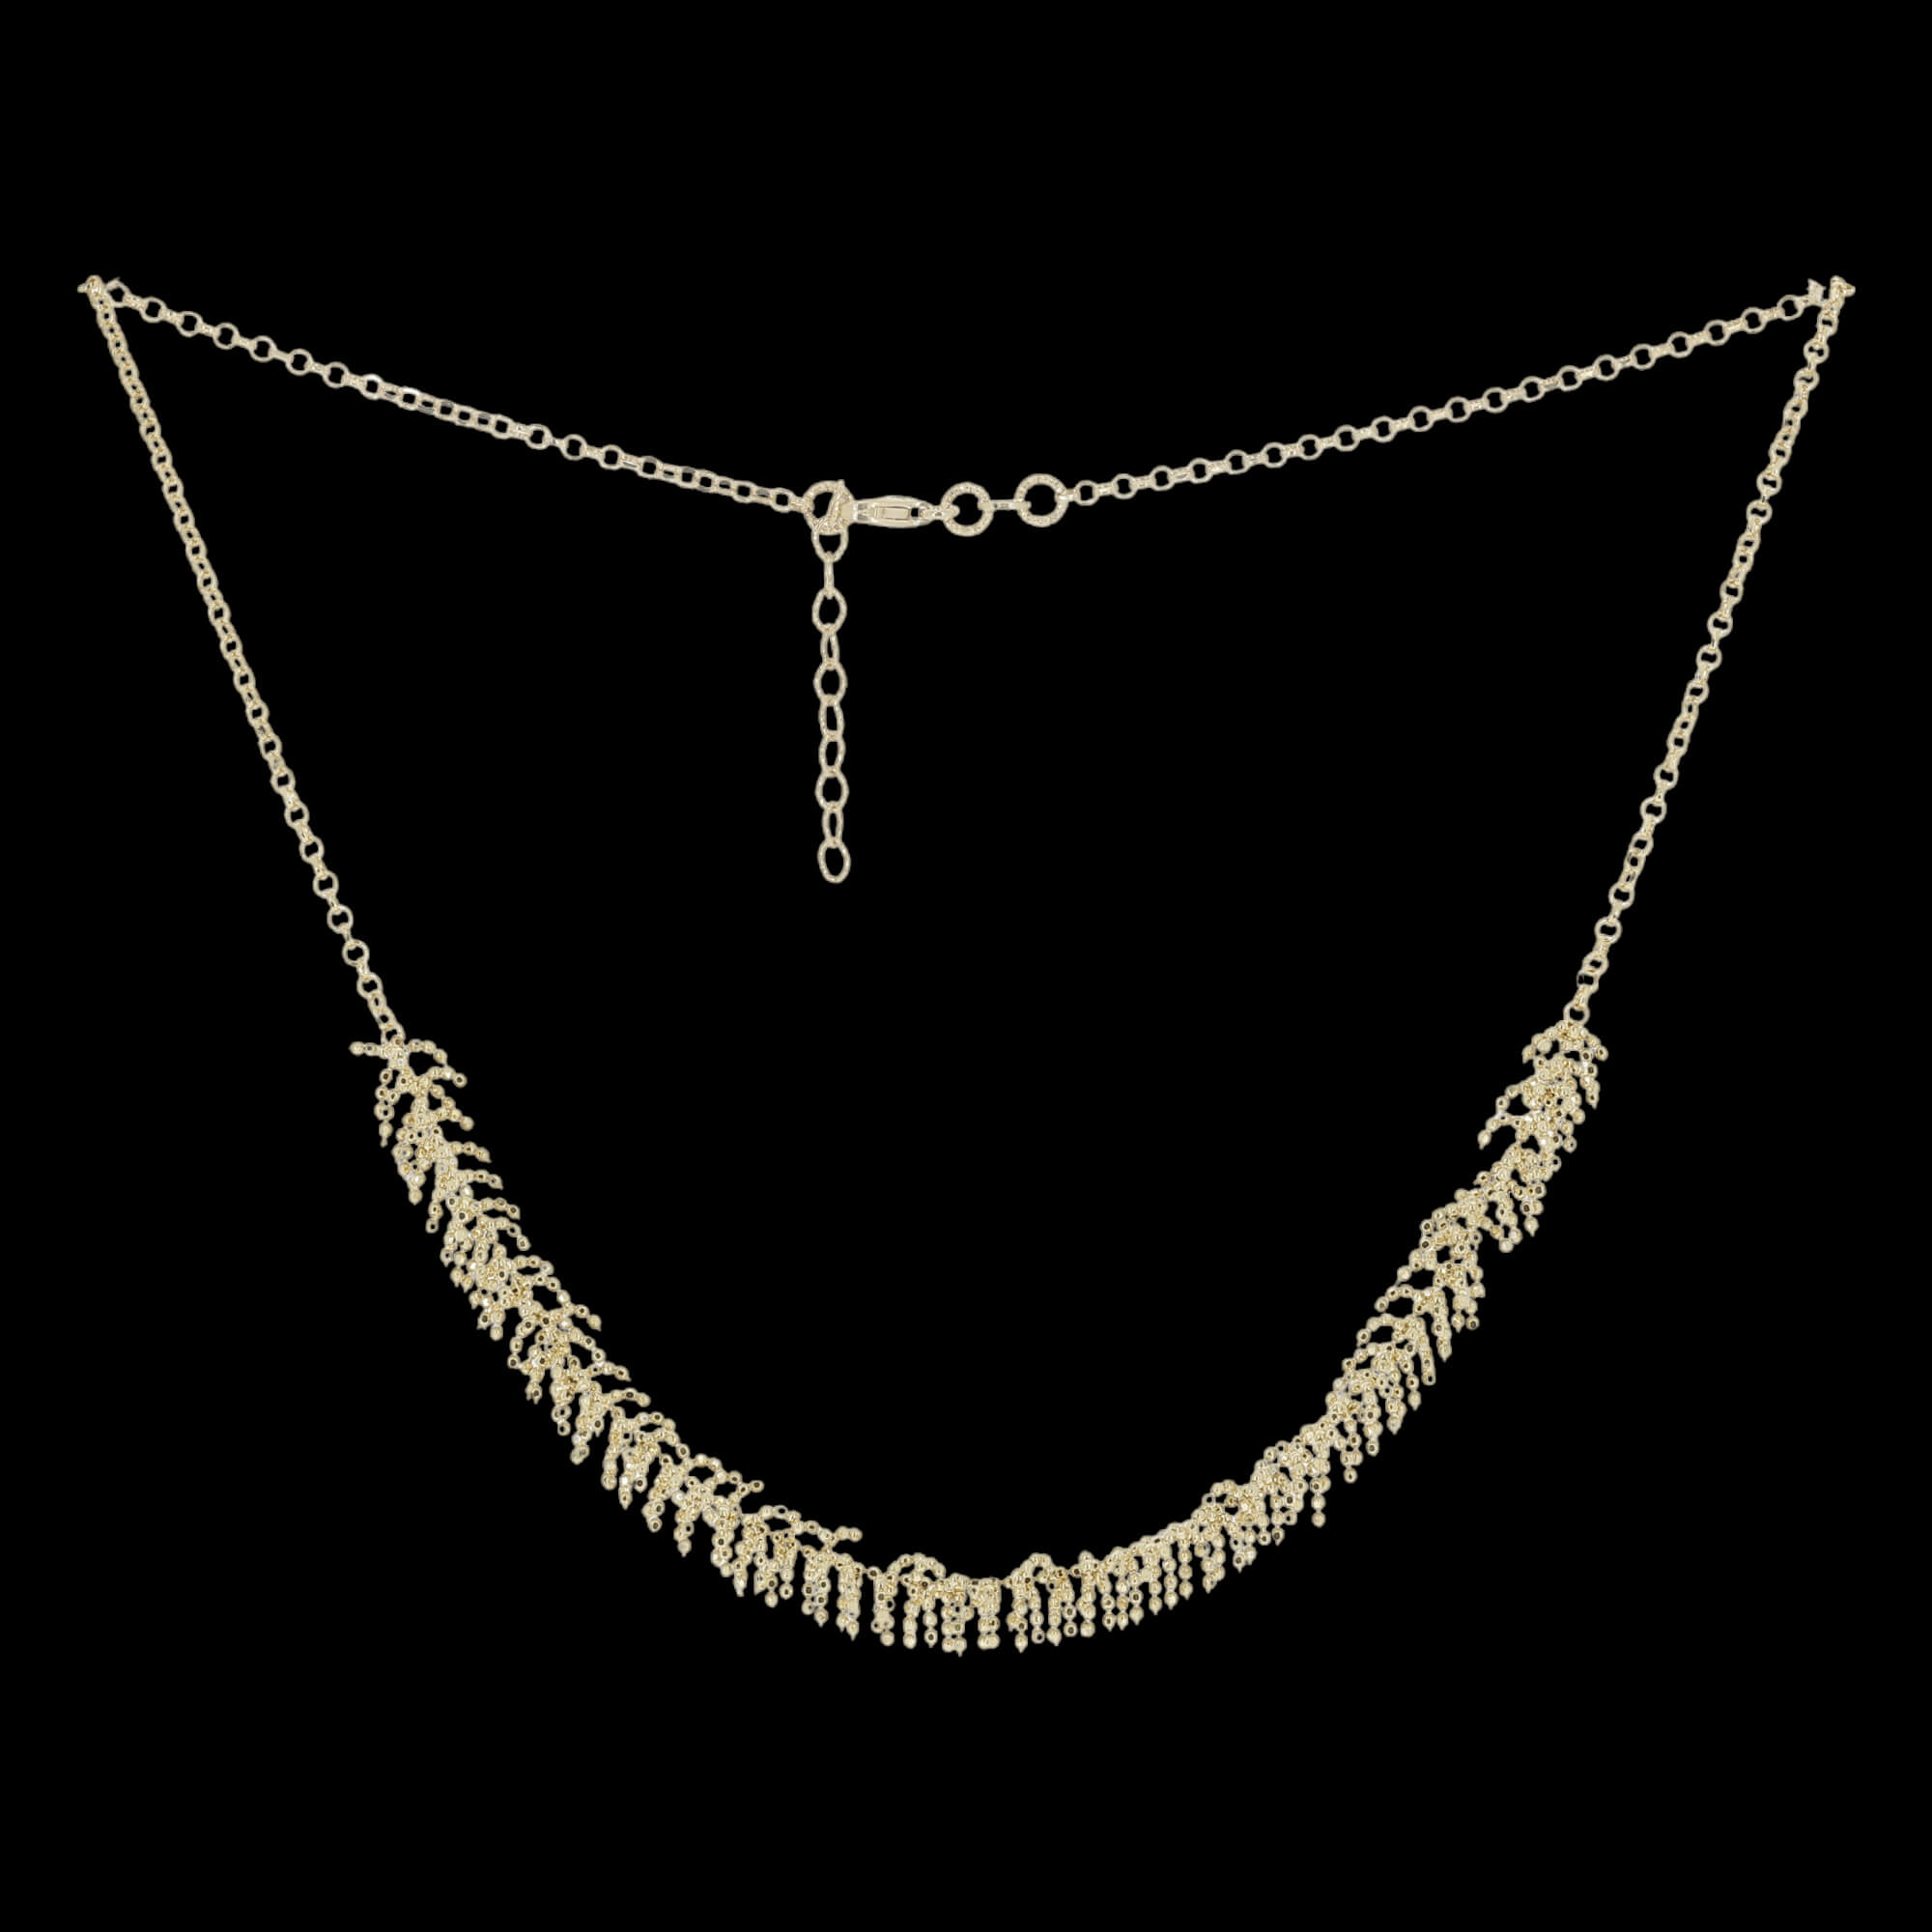 Chic around necklace with refined branches of 18kt gold